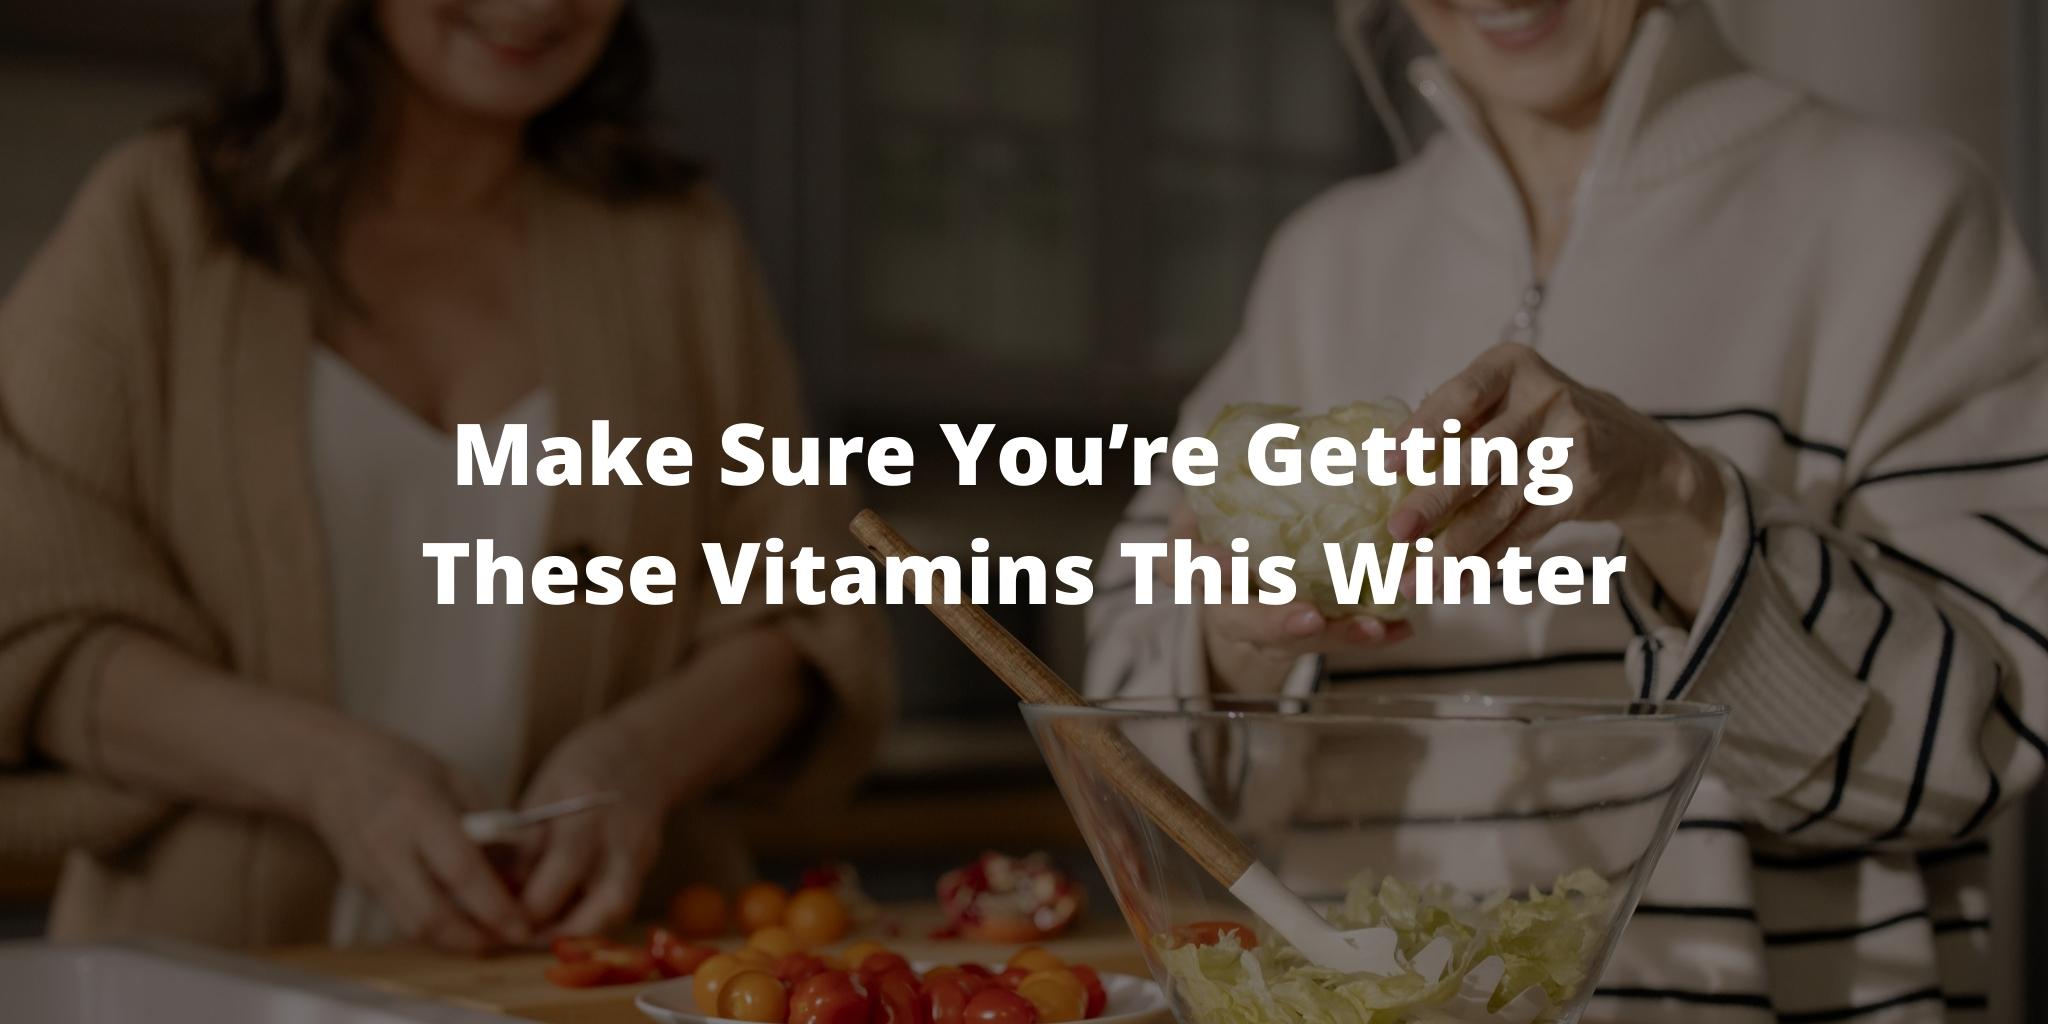 Make Sure You’re Getting These Vitamins This Winter